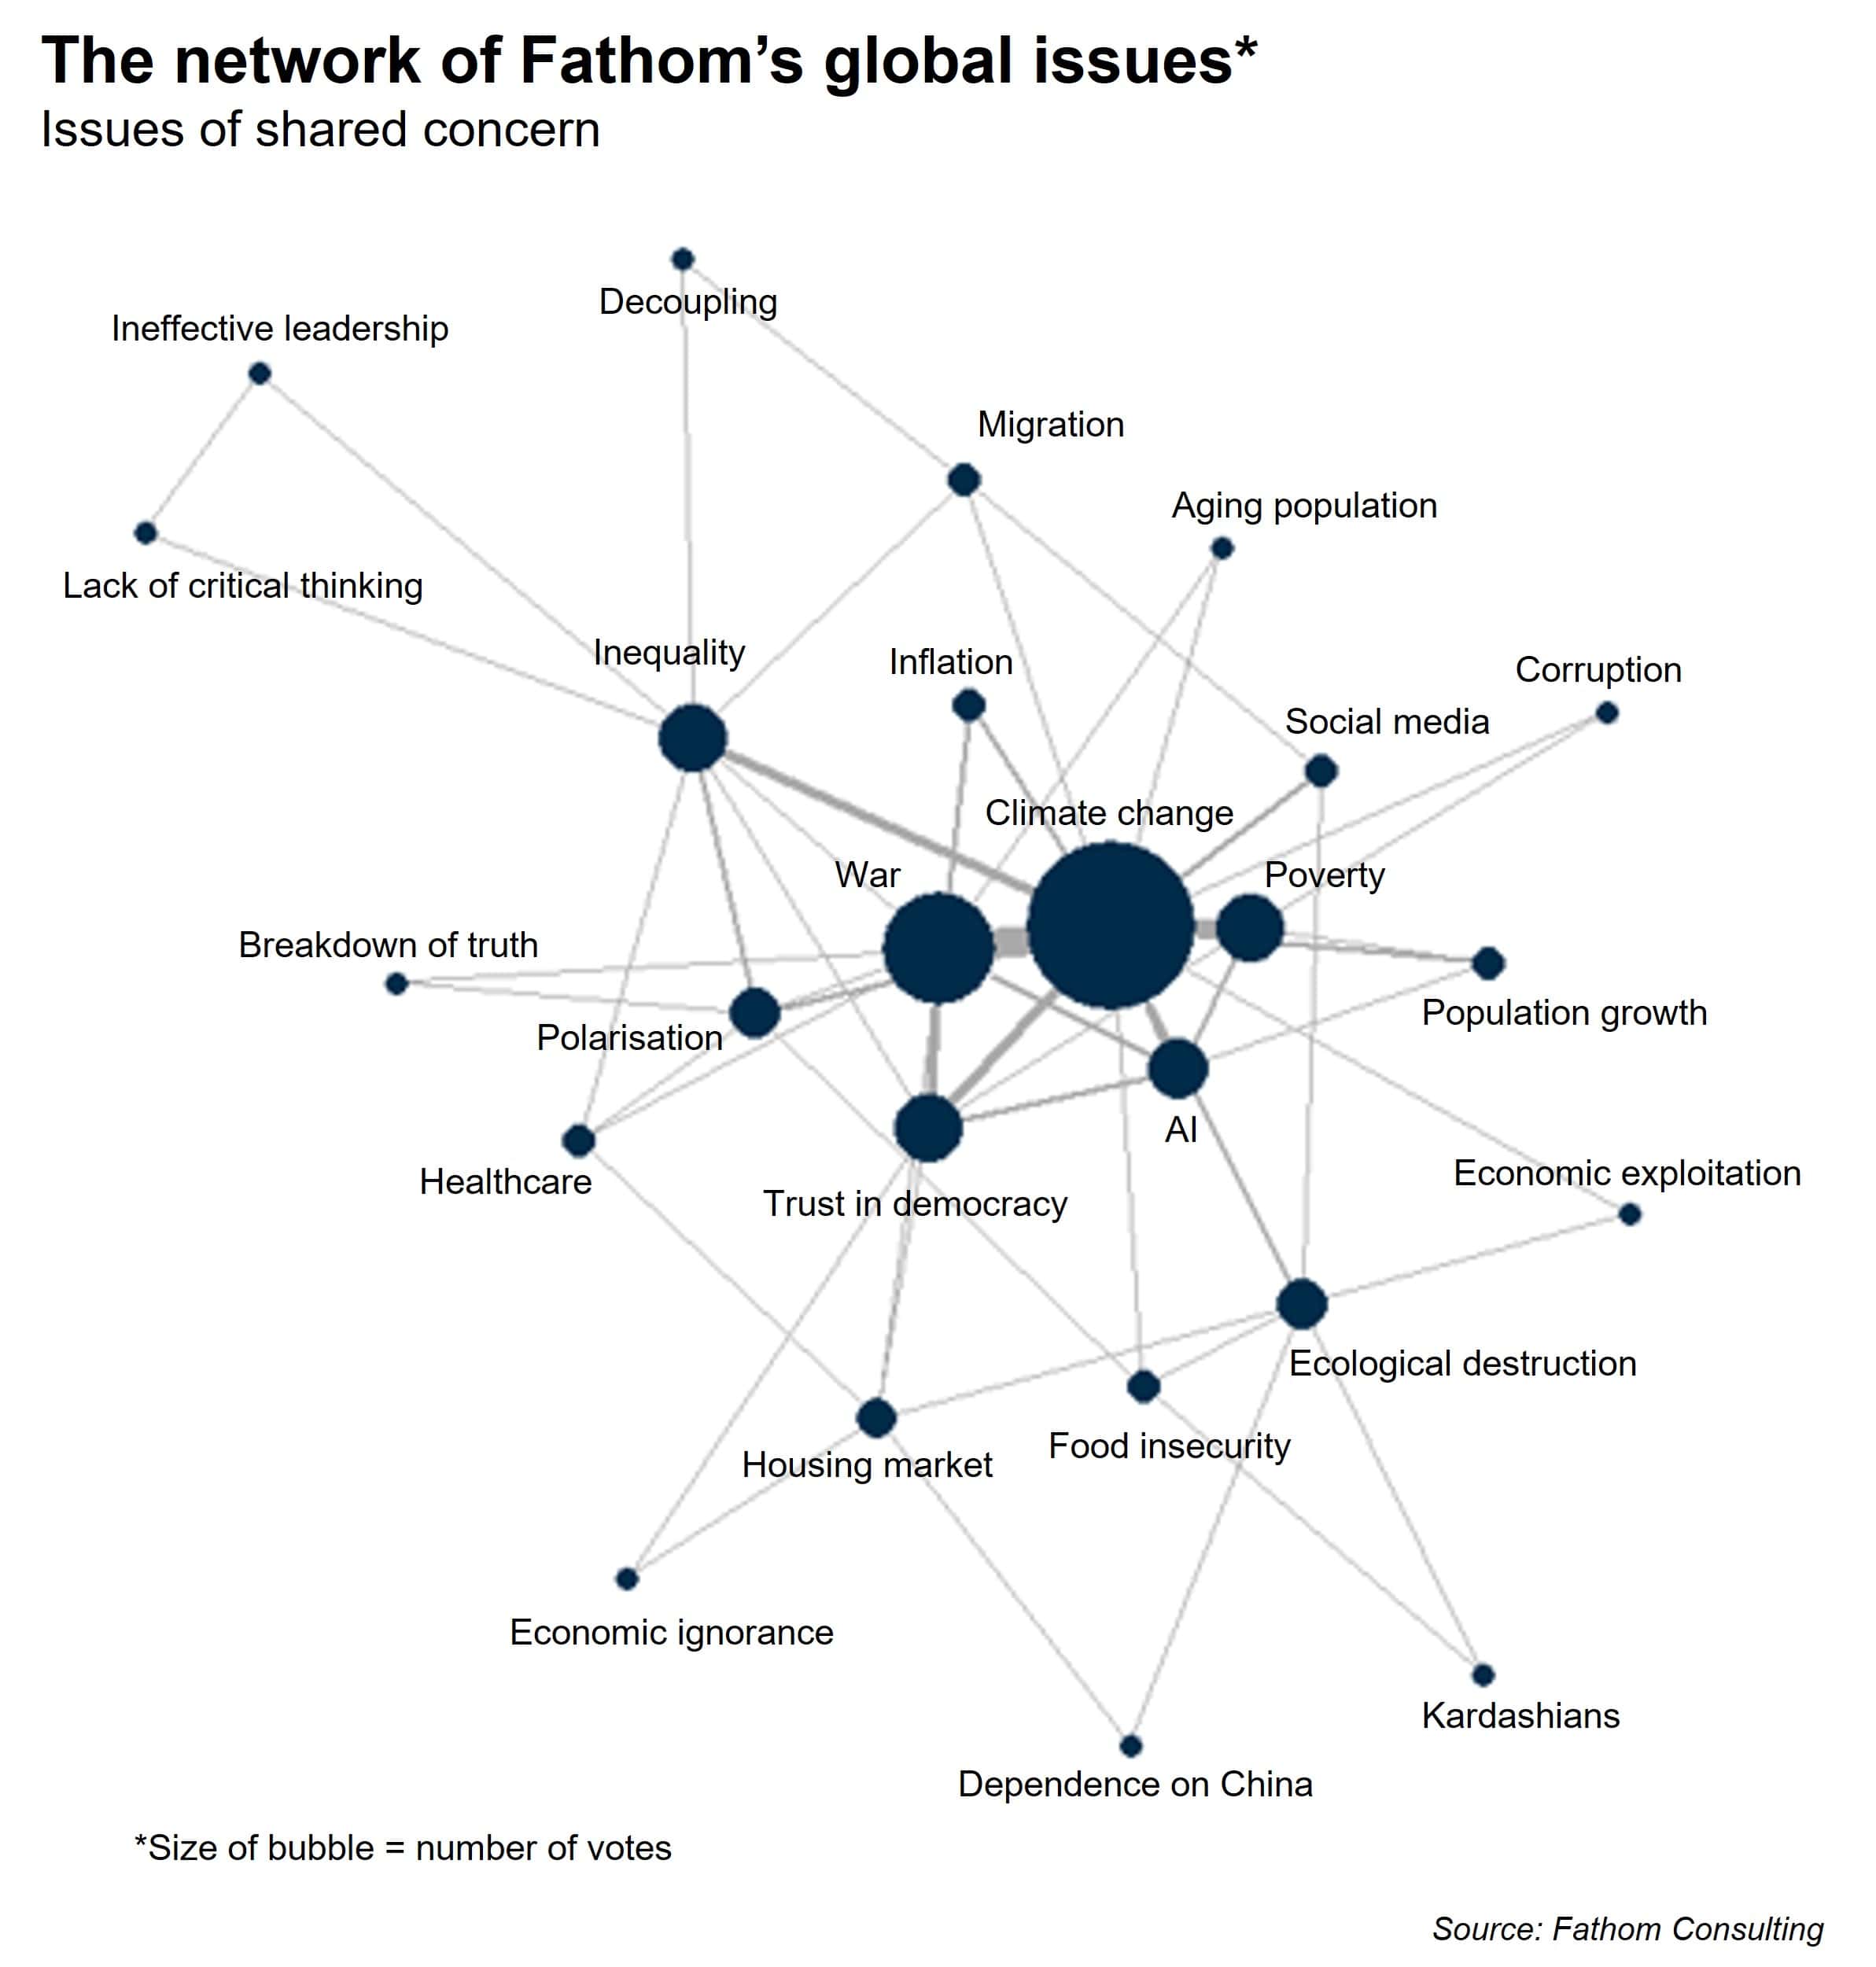 Issues of shared concern, in relation to global issues